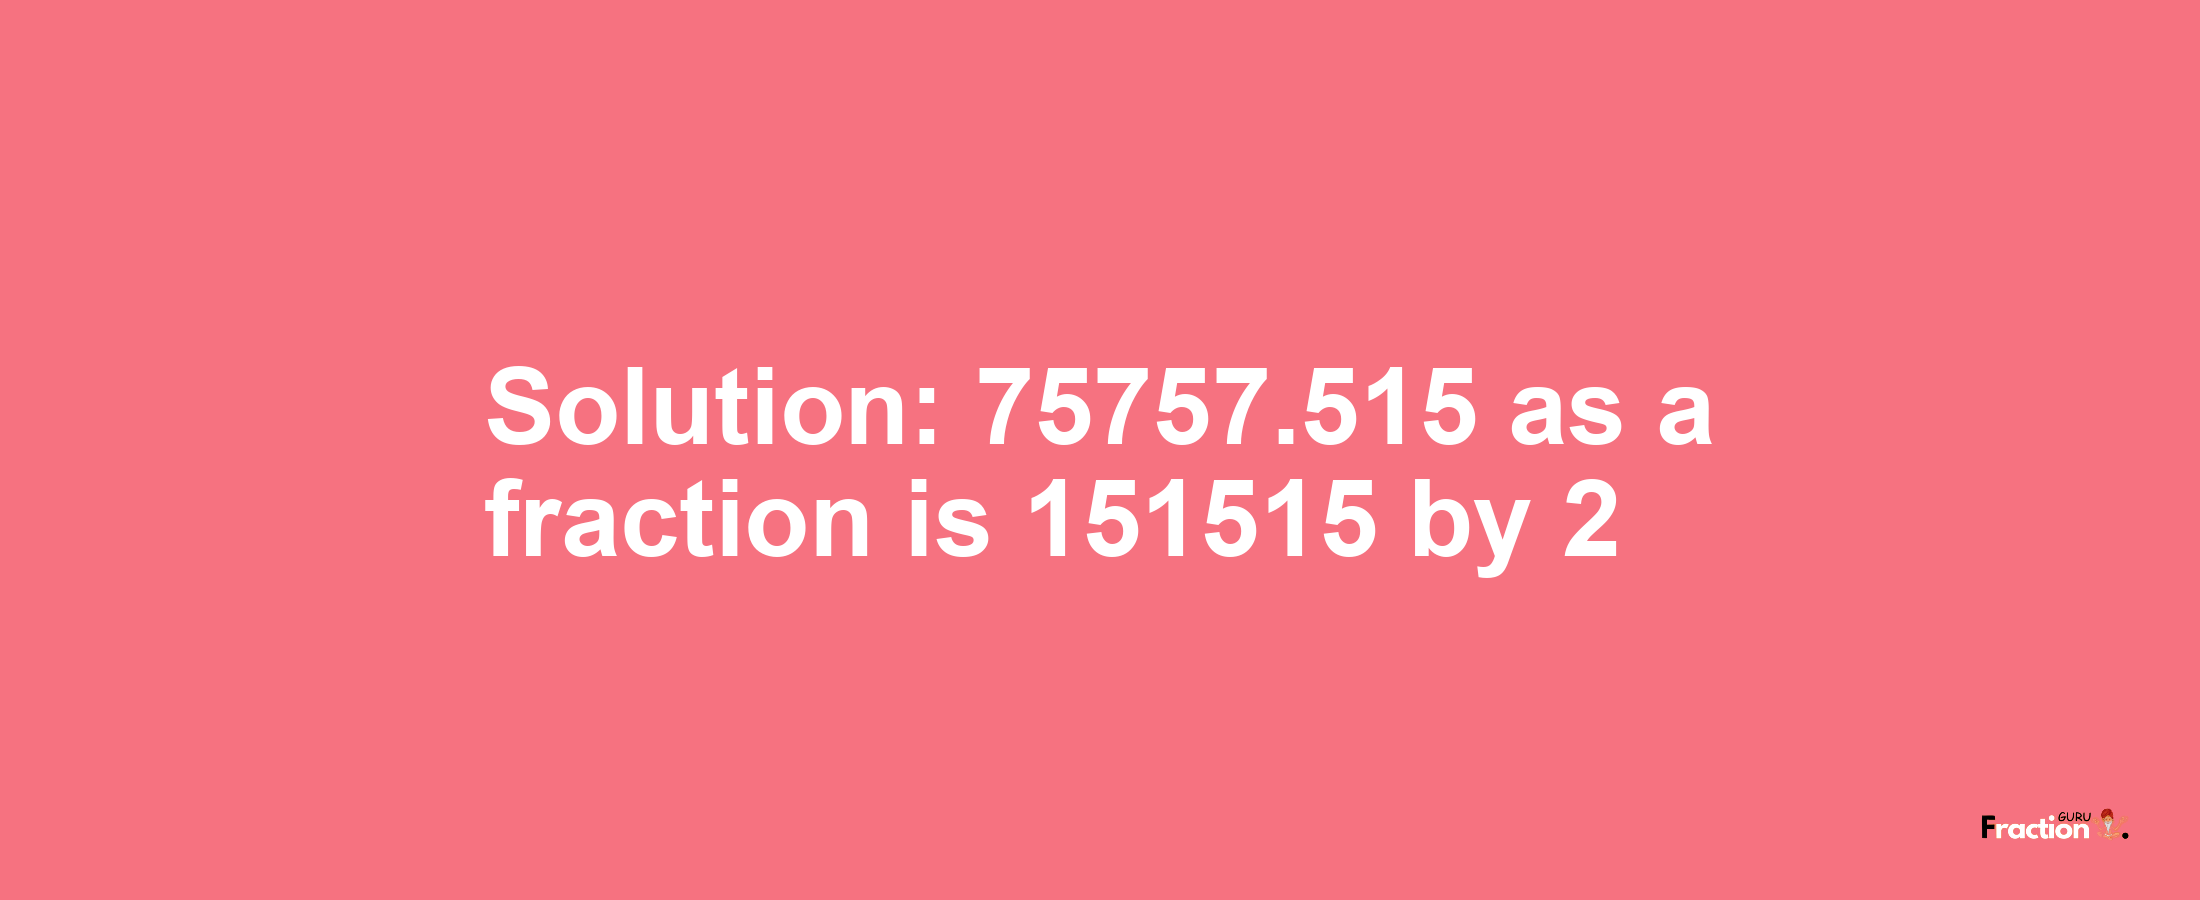 Solution:75757.515 as a fraction is 151515/2